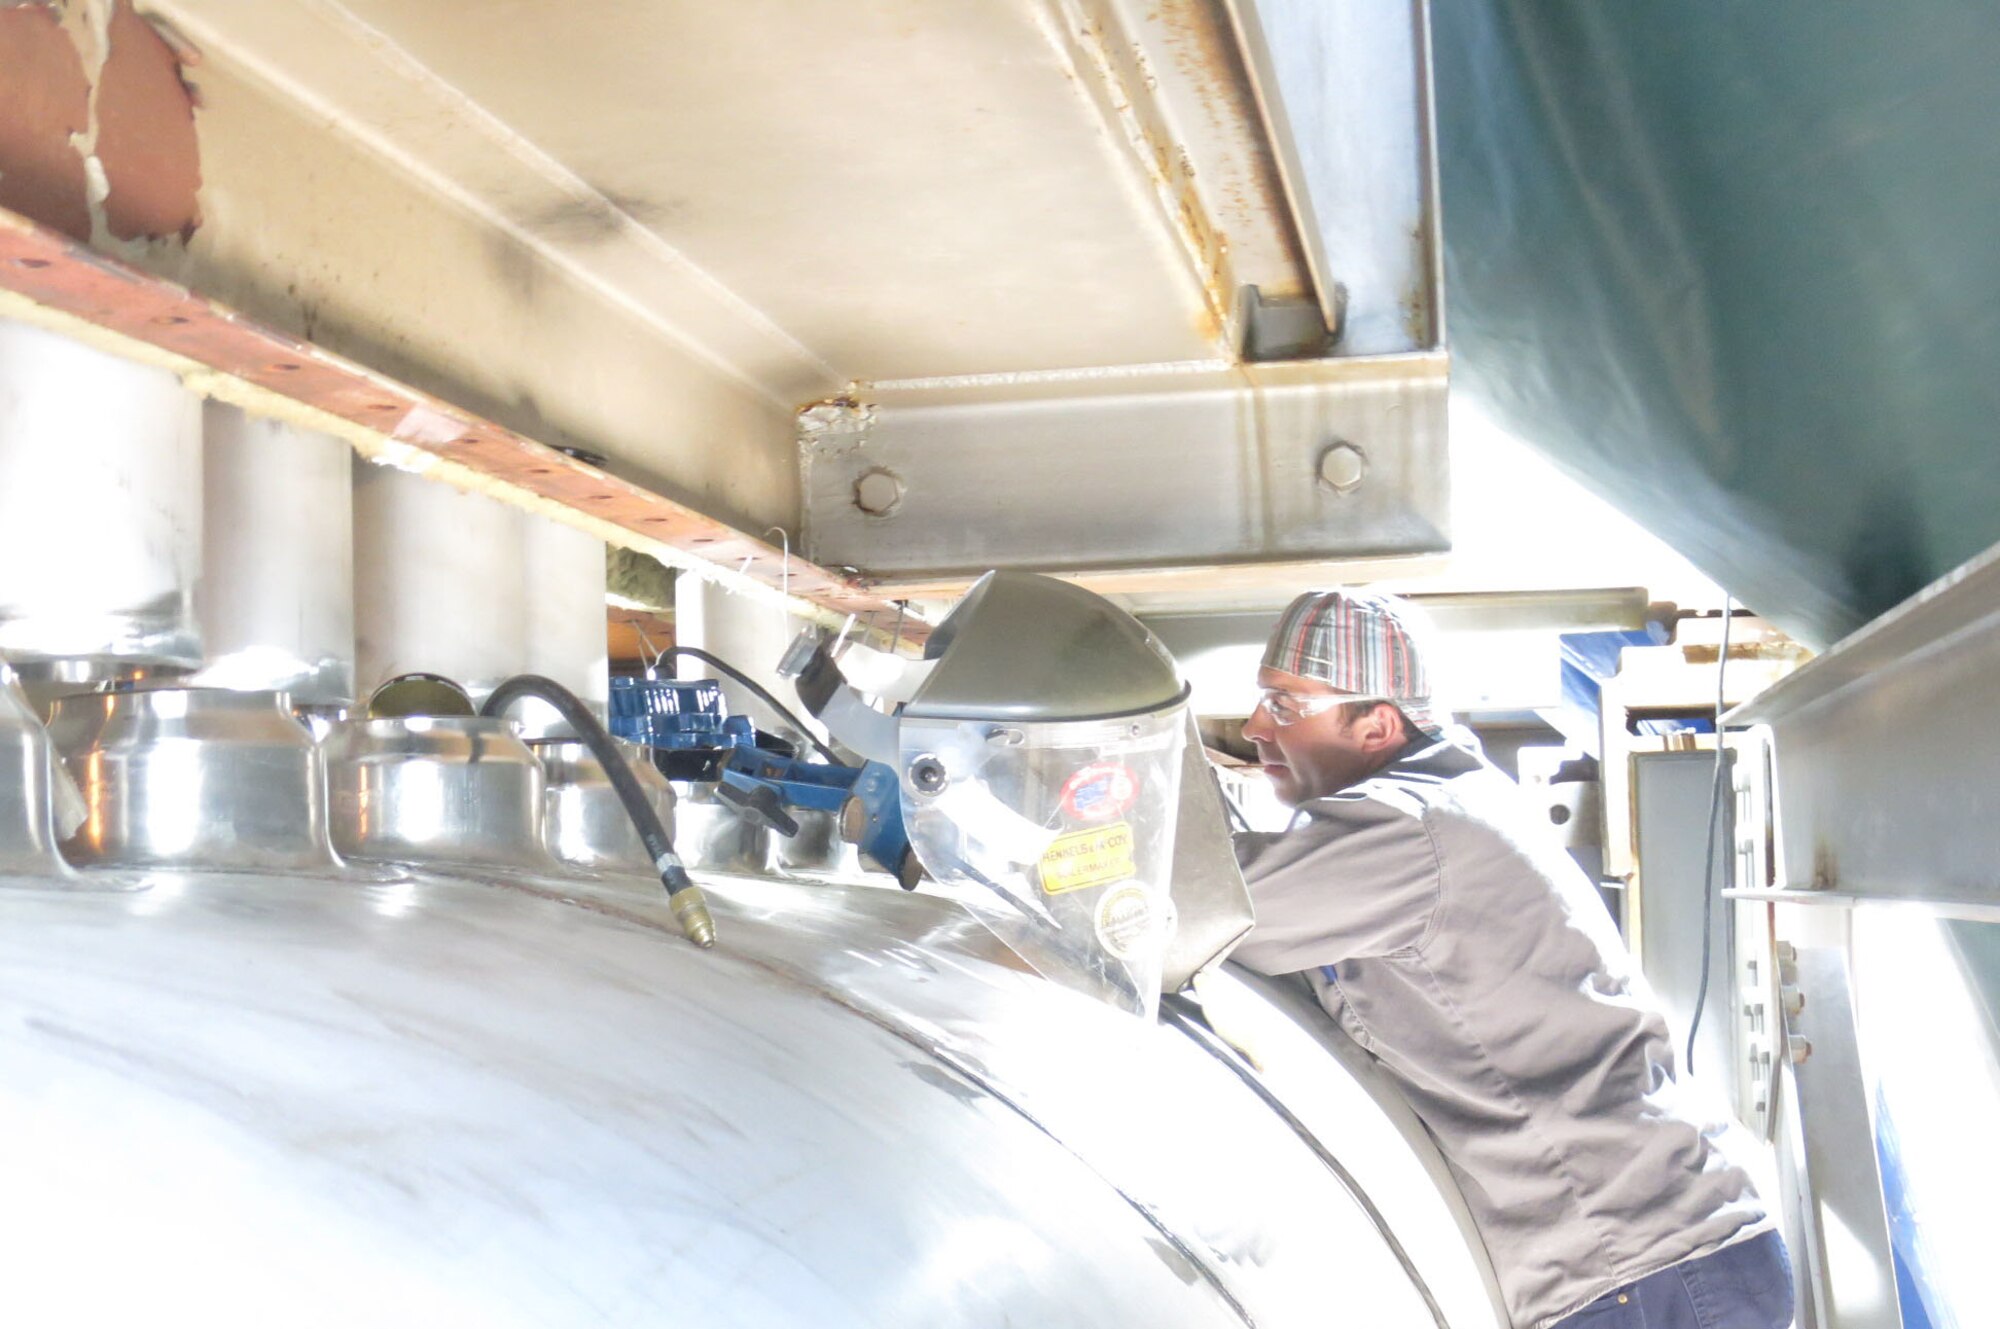 Boilermaker Mack Rogers works to install the header for one of the C-Plant heaters at the AEDC Engine Test Facility at Arnold Air Force Base. An innovative method was used when installing the new header ducts enabling craft crews to finish the project ahead of schedule. (AEDC photo)